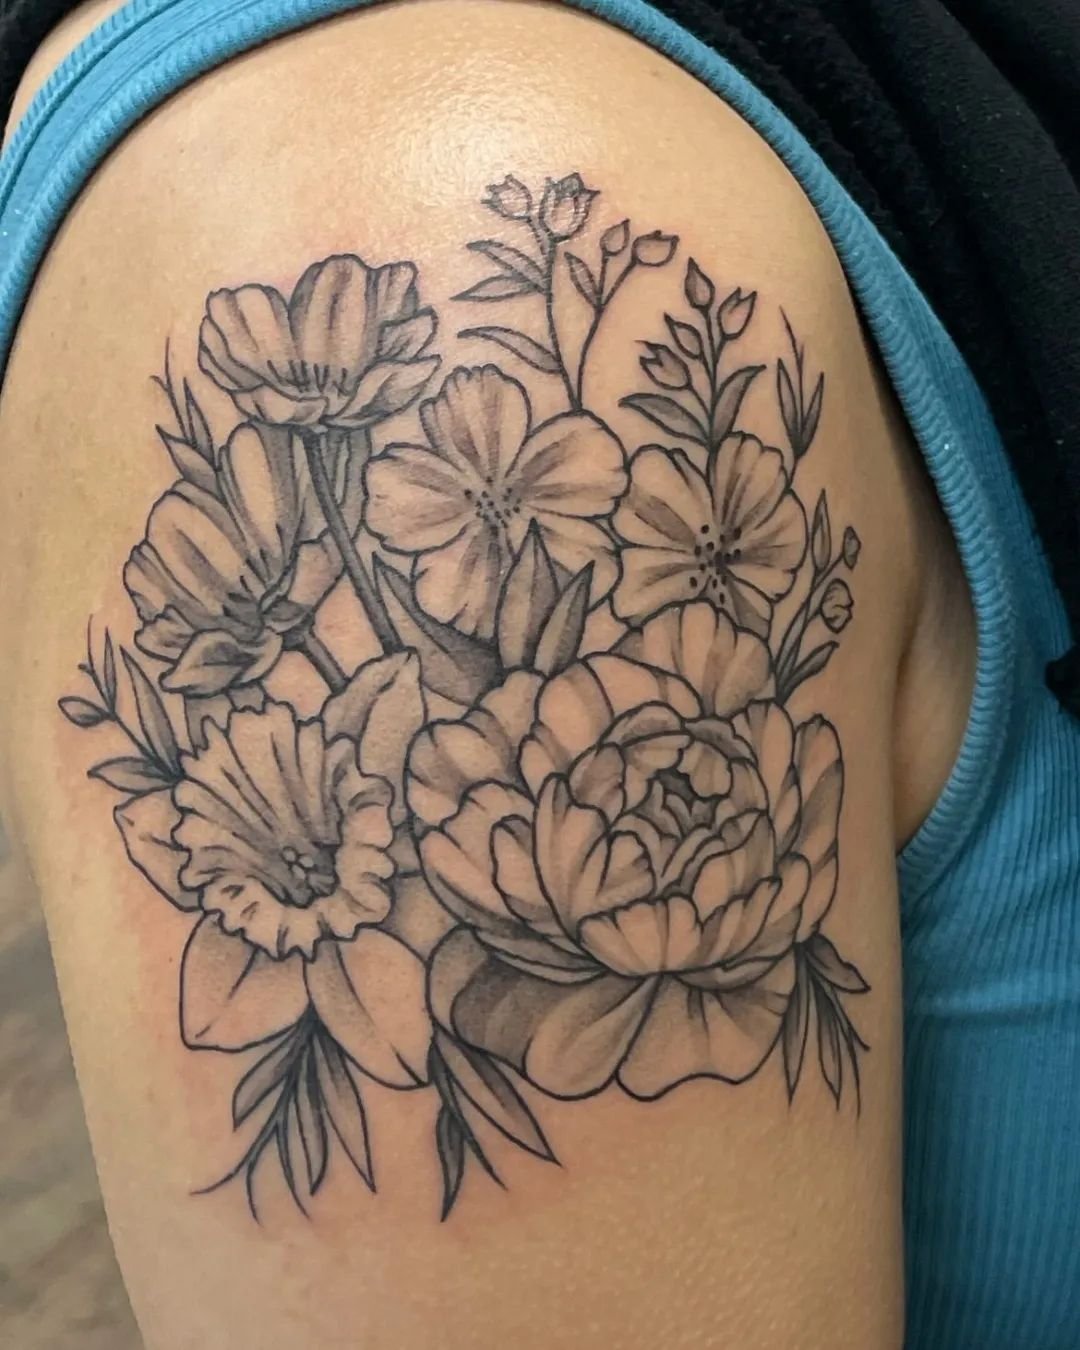 💐What a beautiful bunch of blooming buds from Sarah! 💐

Do you have any flowers tattooed on you? 

(Swipe for a lil guest appearance)